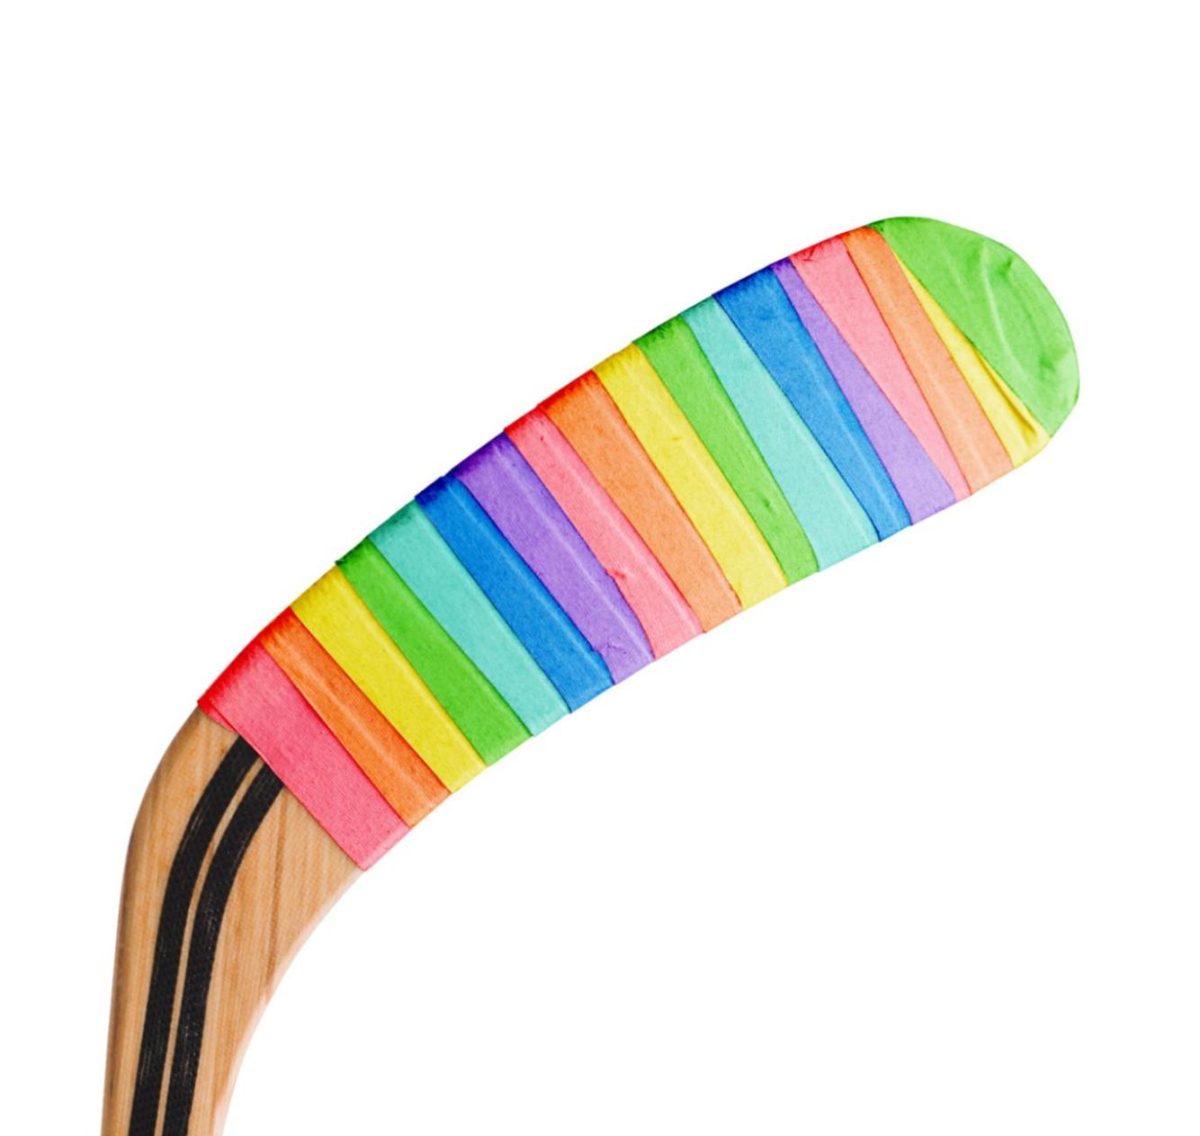 Traditional+hockey+stick+wrapped+in+pride+tape